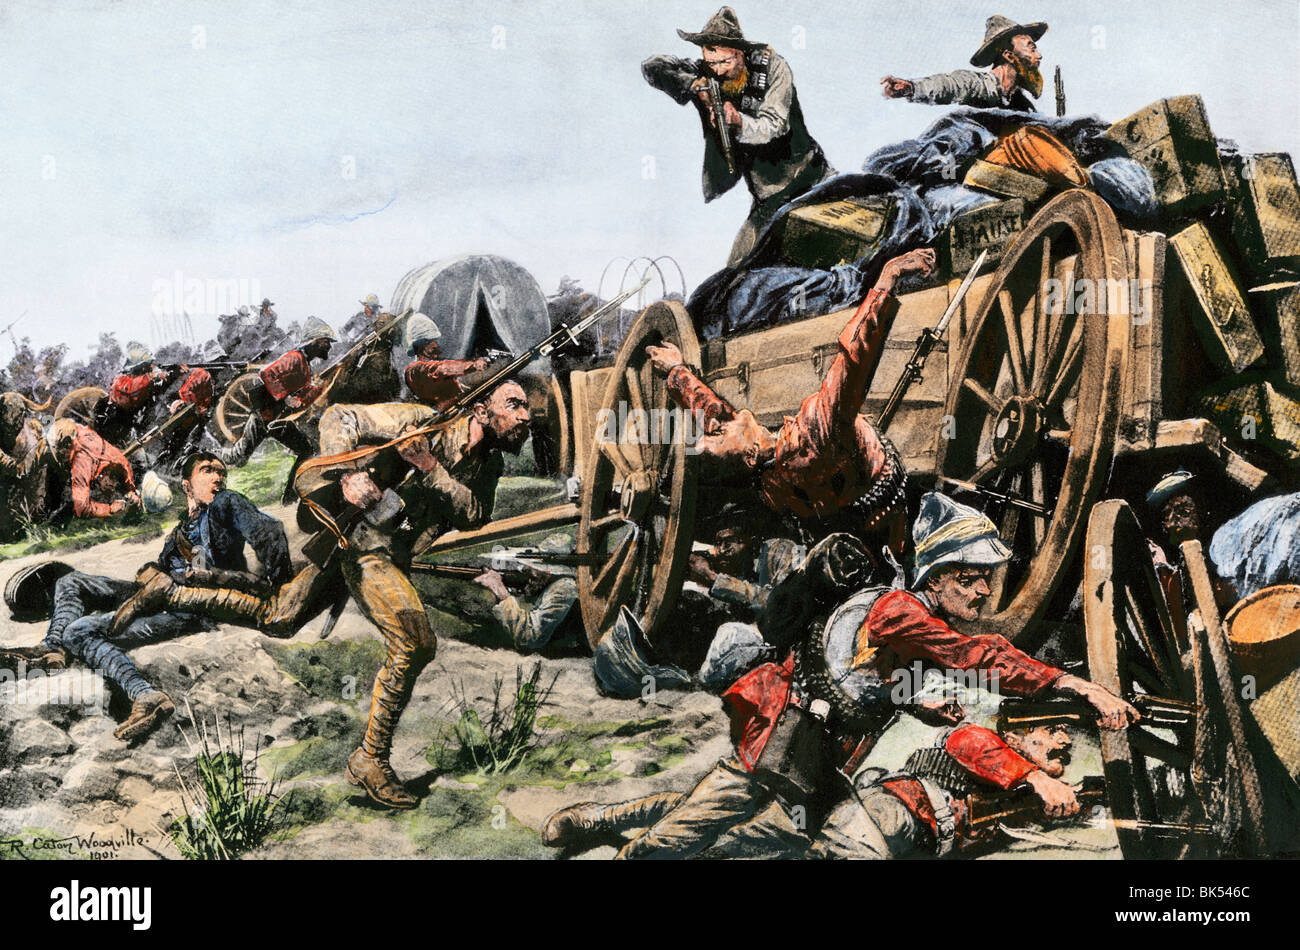 Boer assault on a British convoy in South Africa, 1902. Hand-colored halftone of an illustration Stock Photo